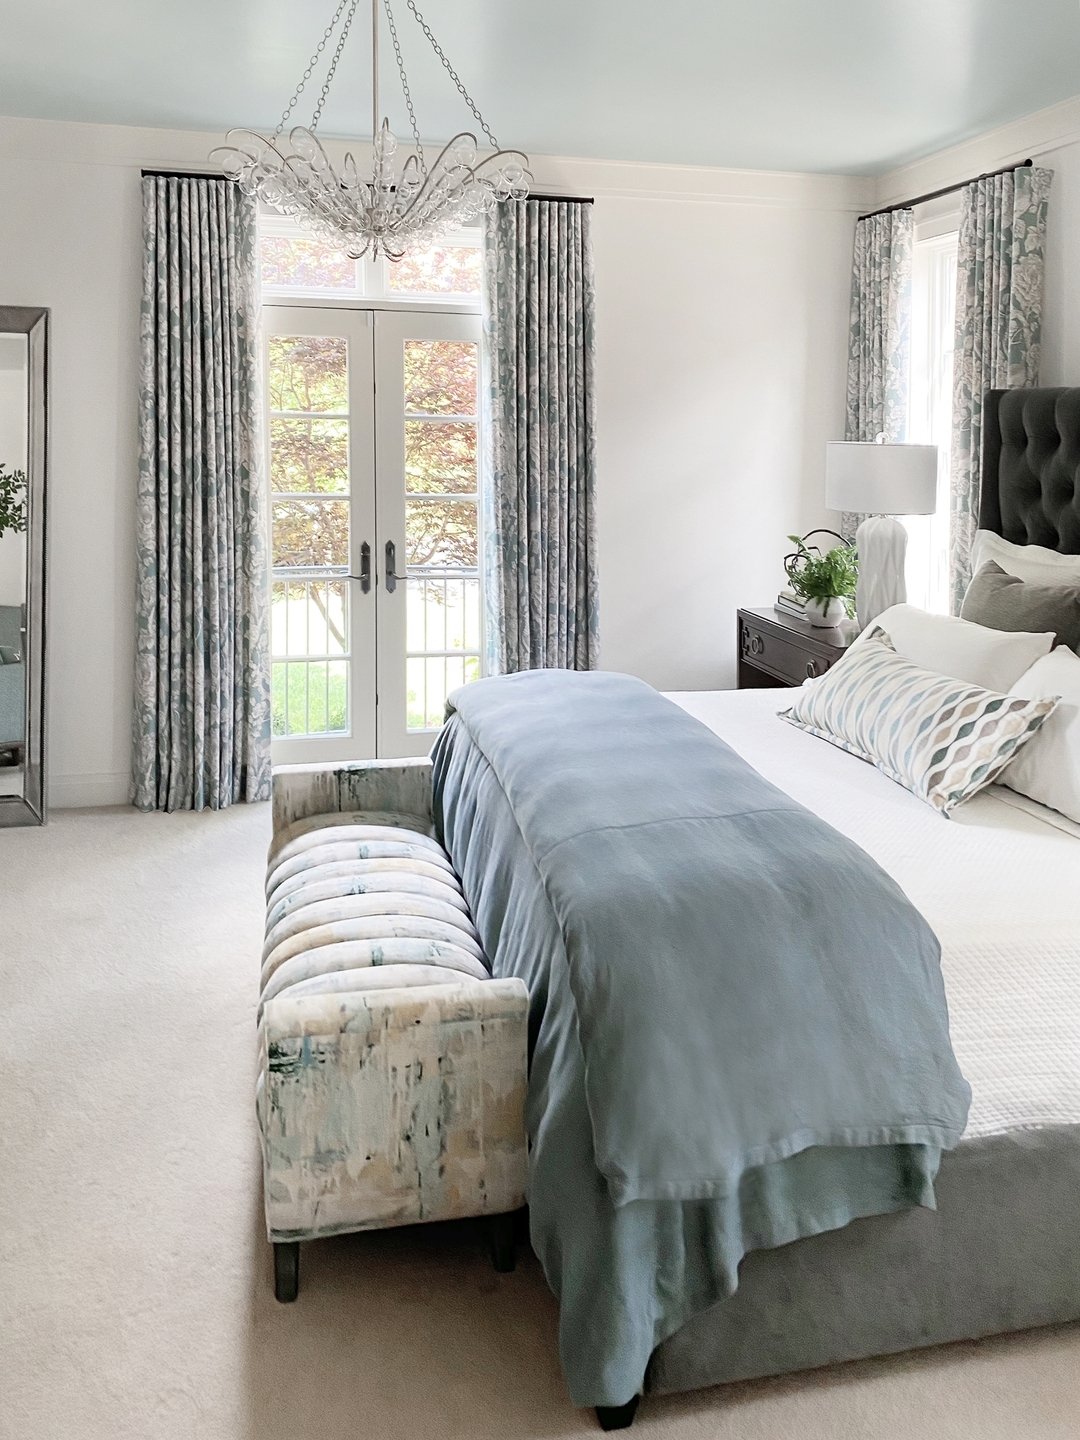 A good nights sleep is mission critical. 💤💤💤​​​​​​​​
​​​​​​​​
Comfortable and calming was the goal for this primary suite.  What is on your short list for a dreamy bedroom?​​​​​​​​
​​​​​​​​
Ready to create your own nurturing sanctuary?  Click that